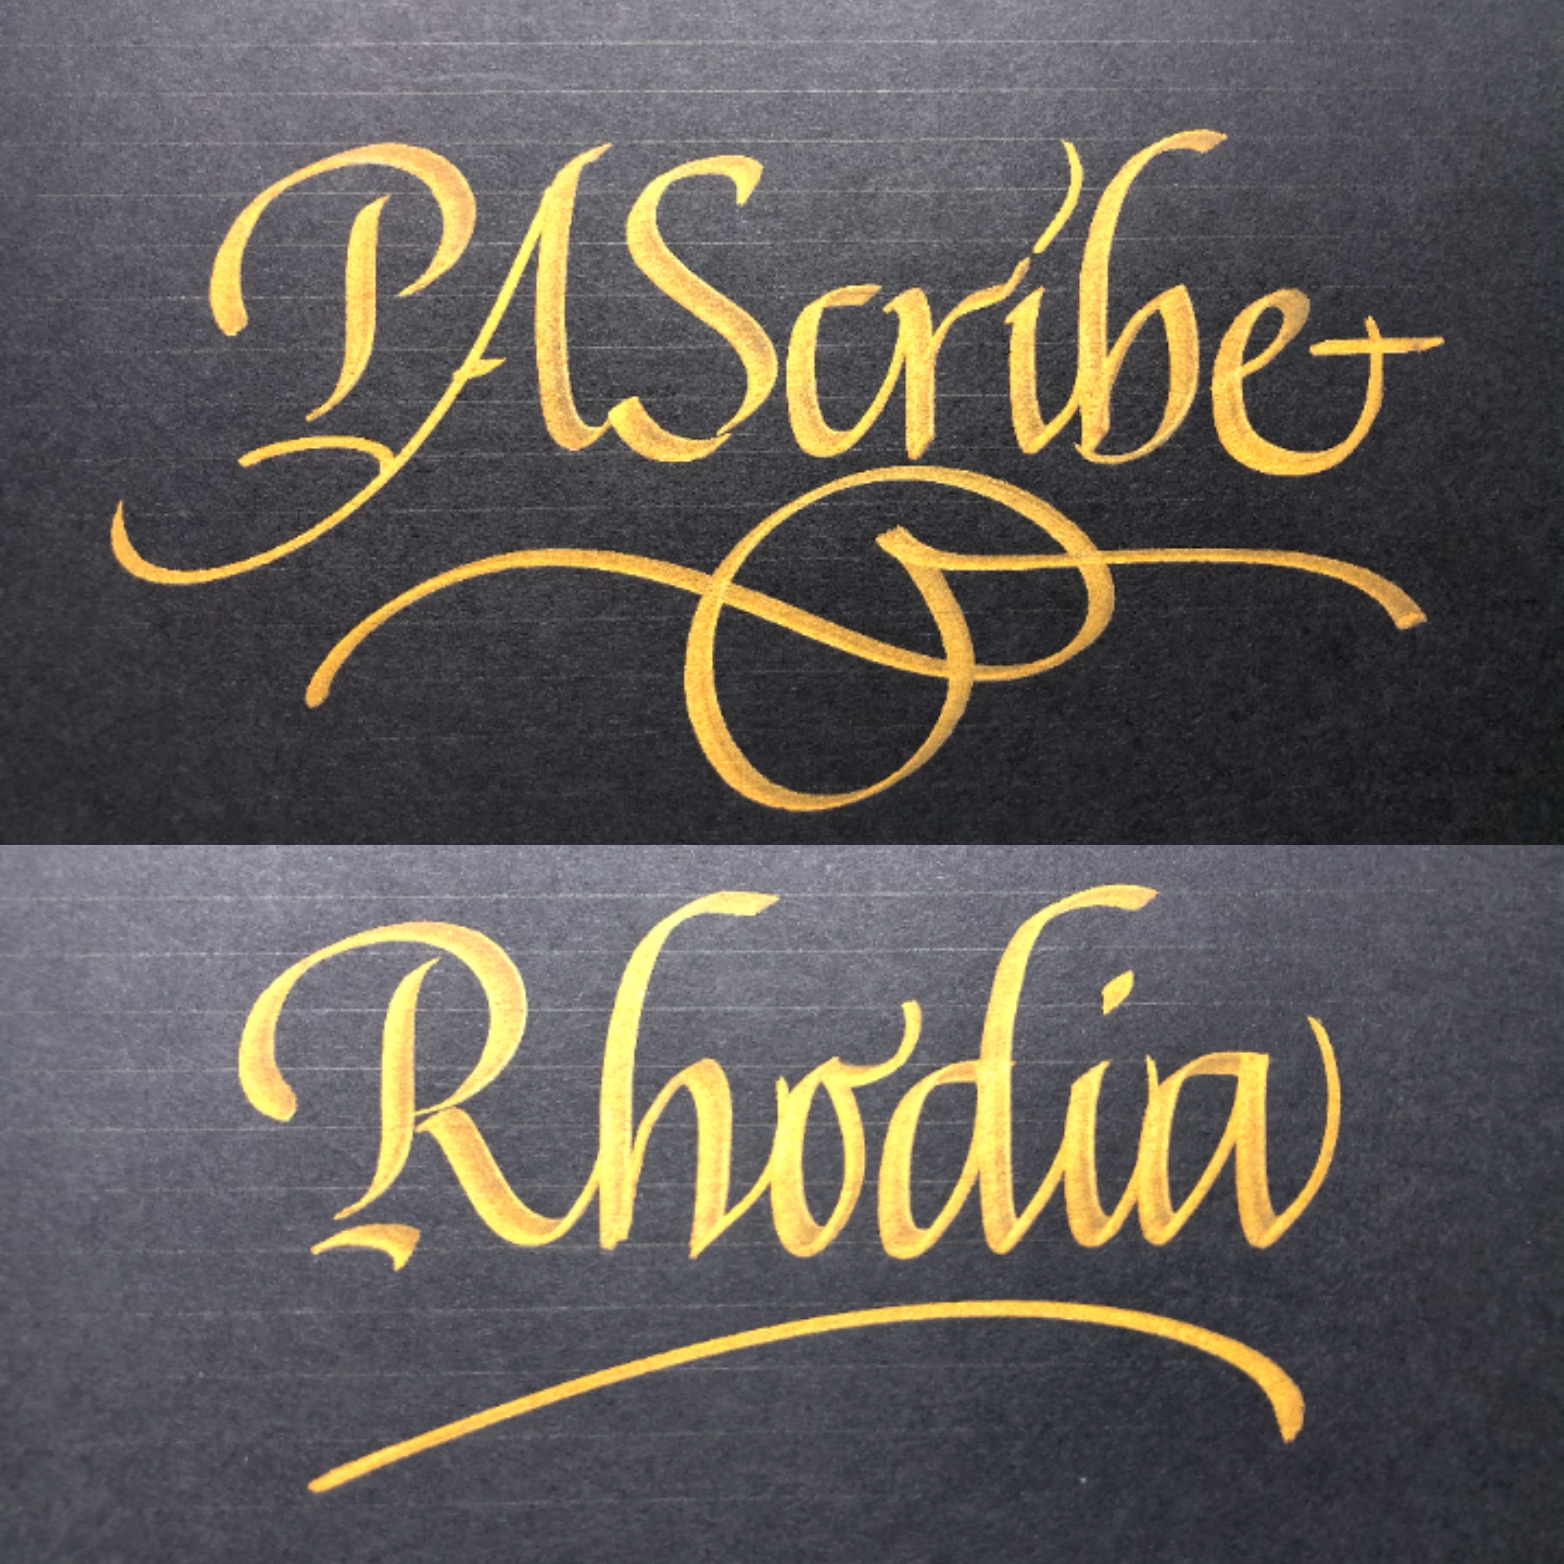 Rhodia Calligraphy Carb'On Pad liniert, A4+ 'PAScribe' 